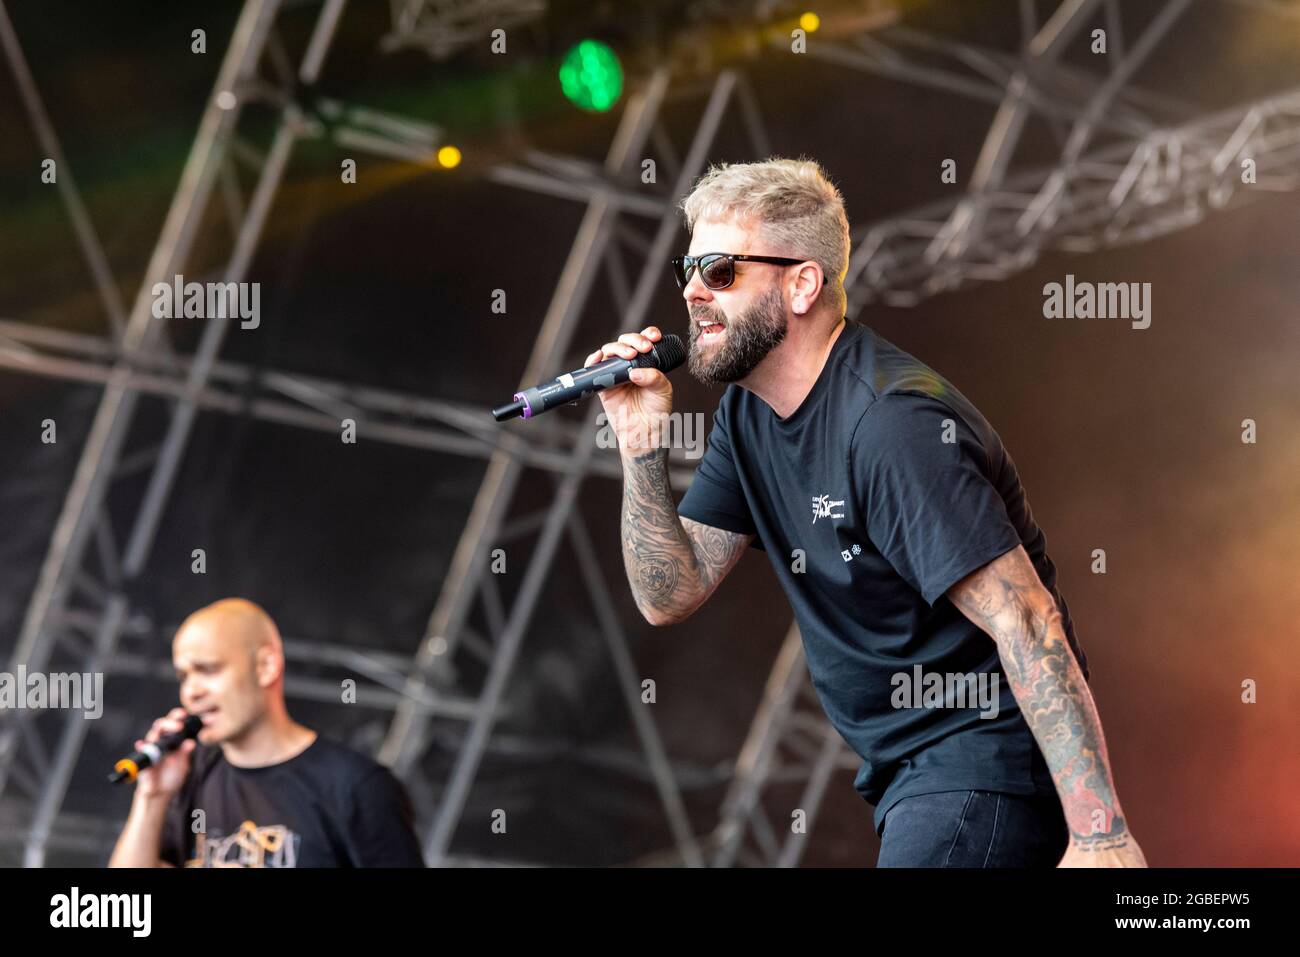 Scott Robinson of the band Five, stylised as 5ive, performing at Fantasia music festival in Maldon, Essex, UK. First concert after COVID 19 pandemic Stock Photo